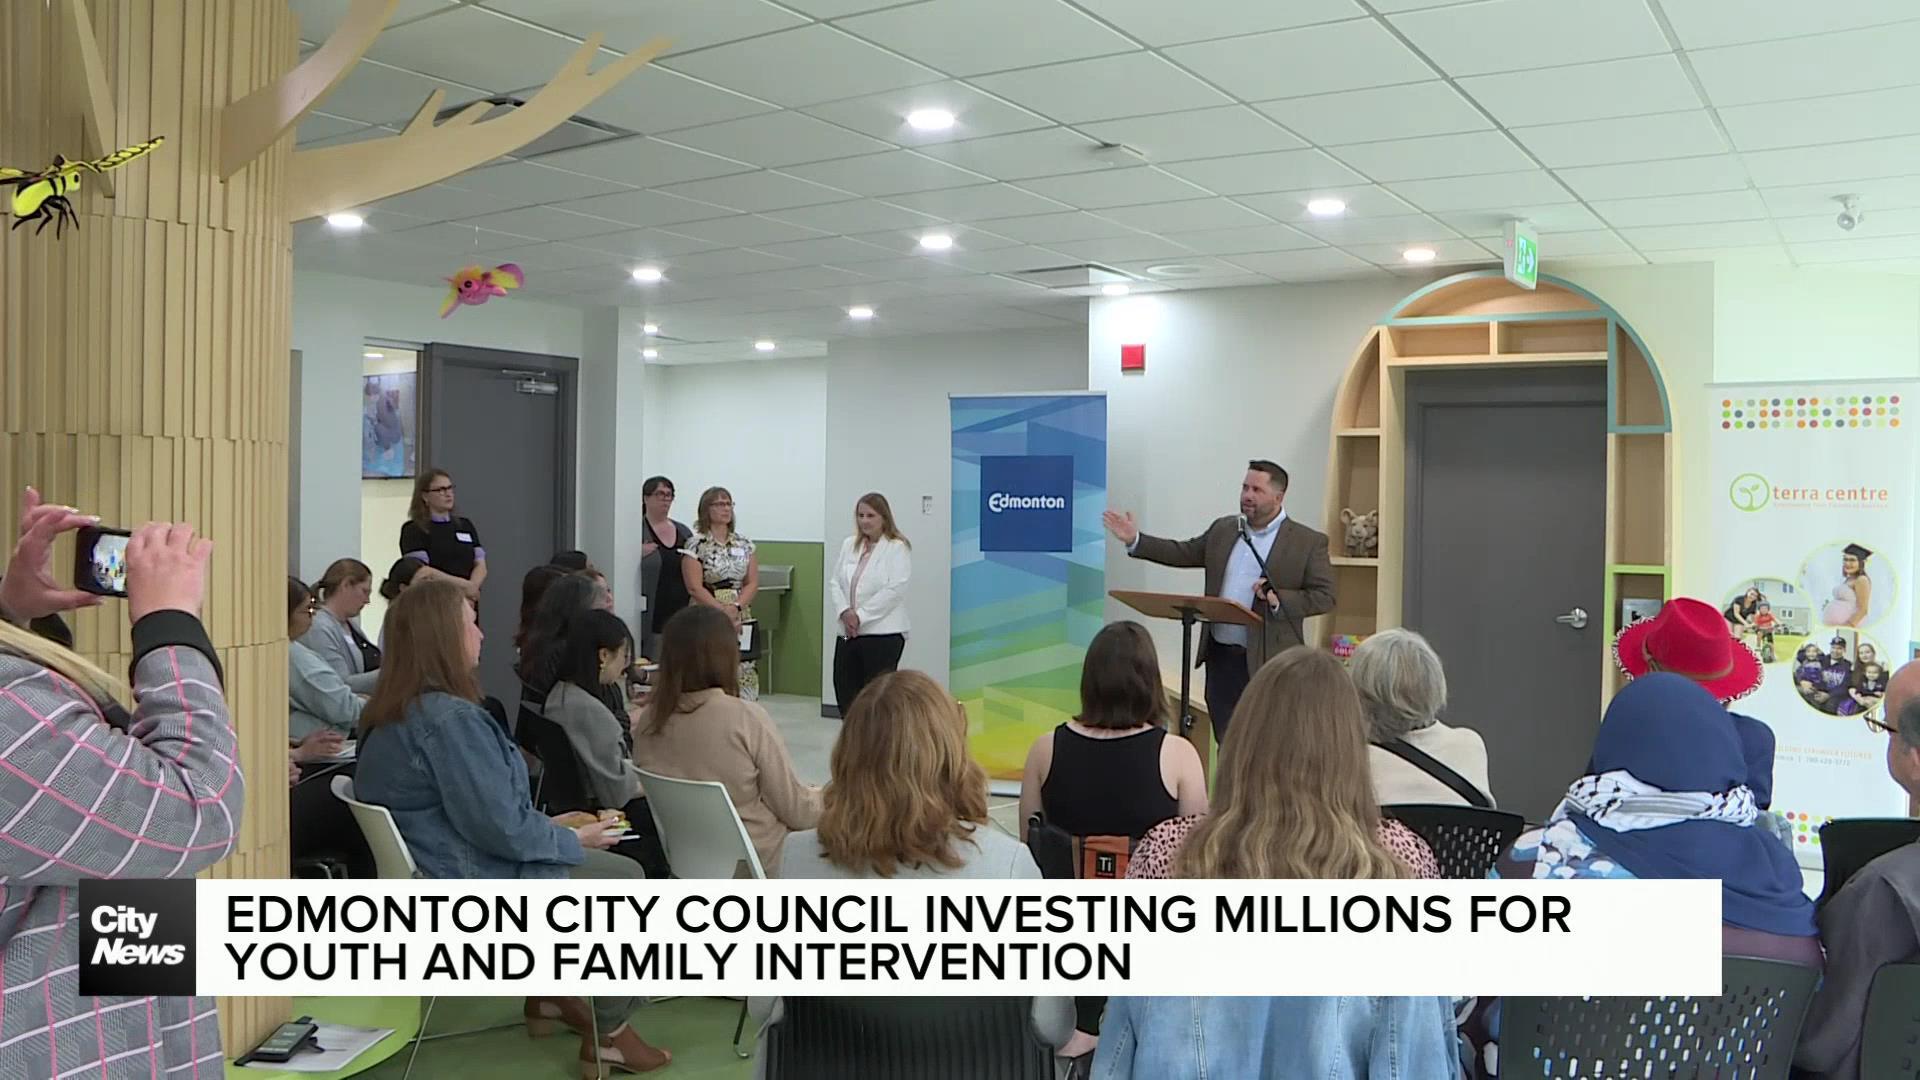 Edmonton city council invests 5 million dollars through Community Safety and Well-Being grant